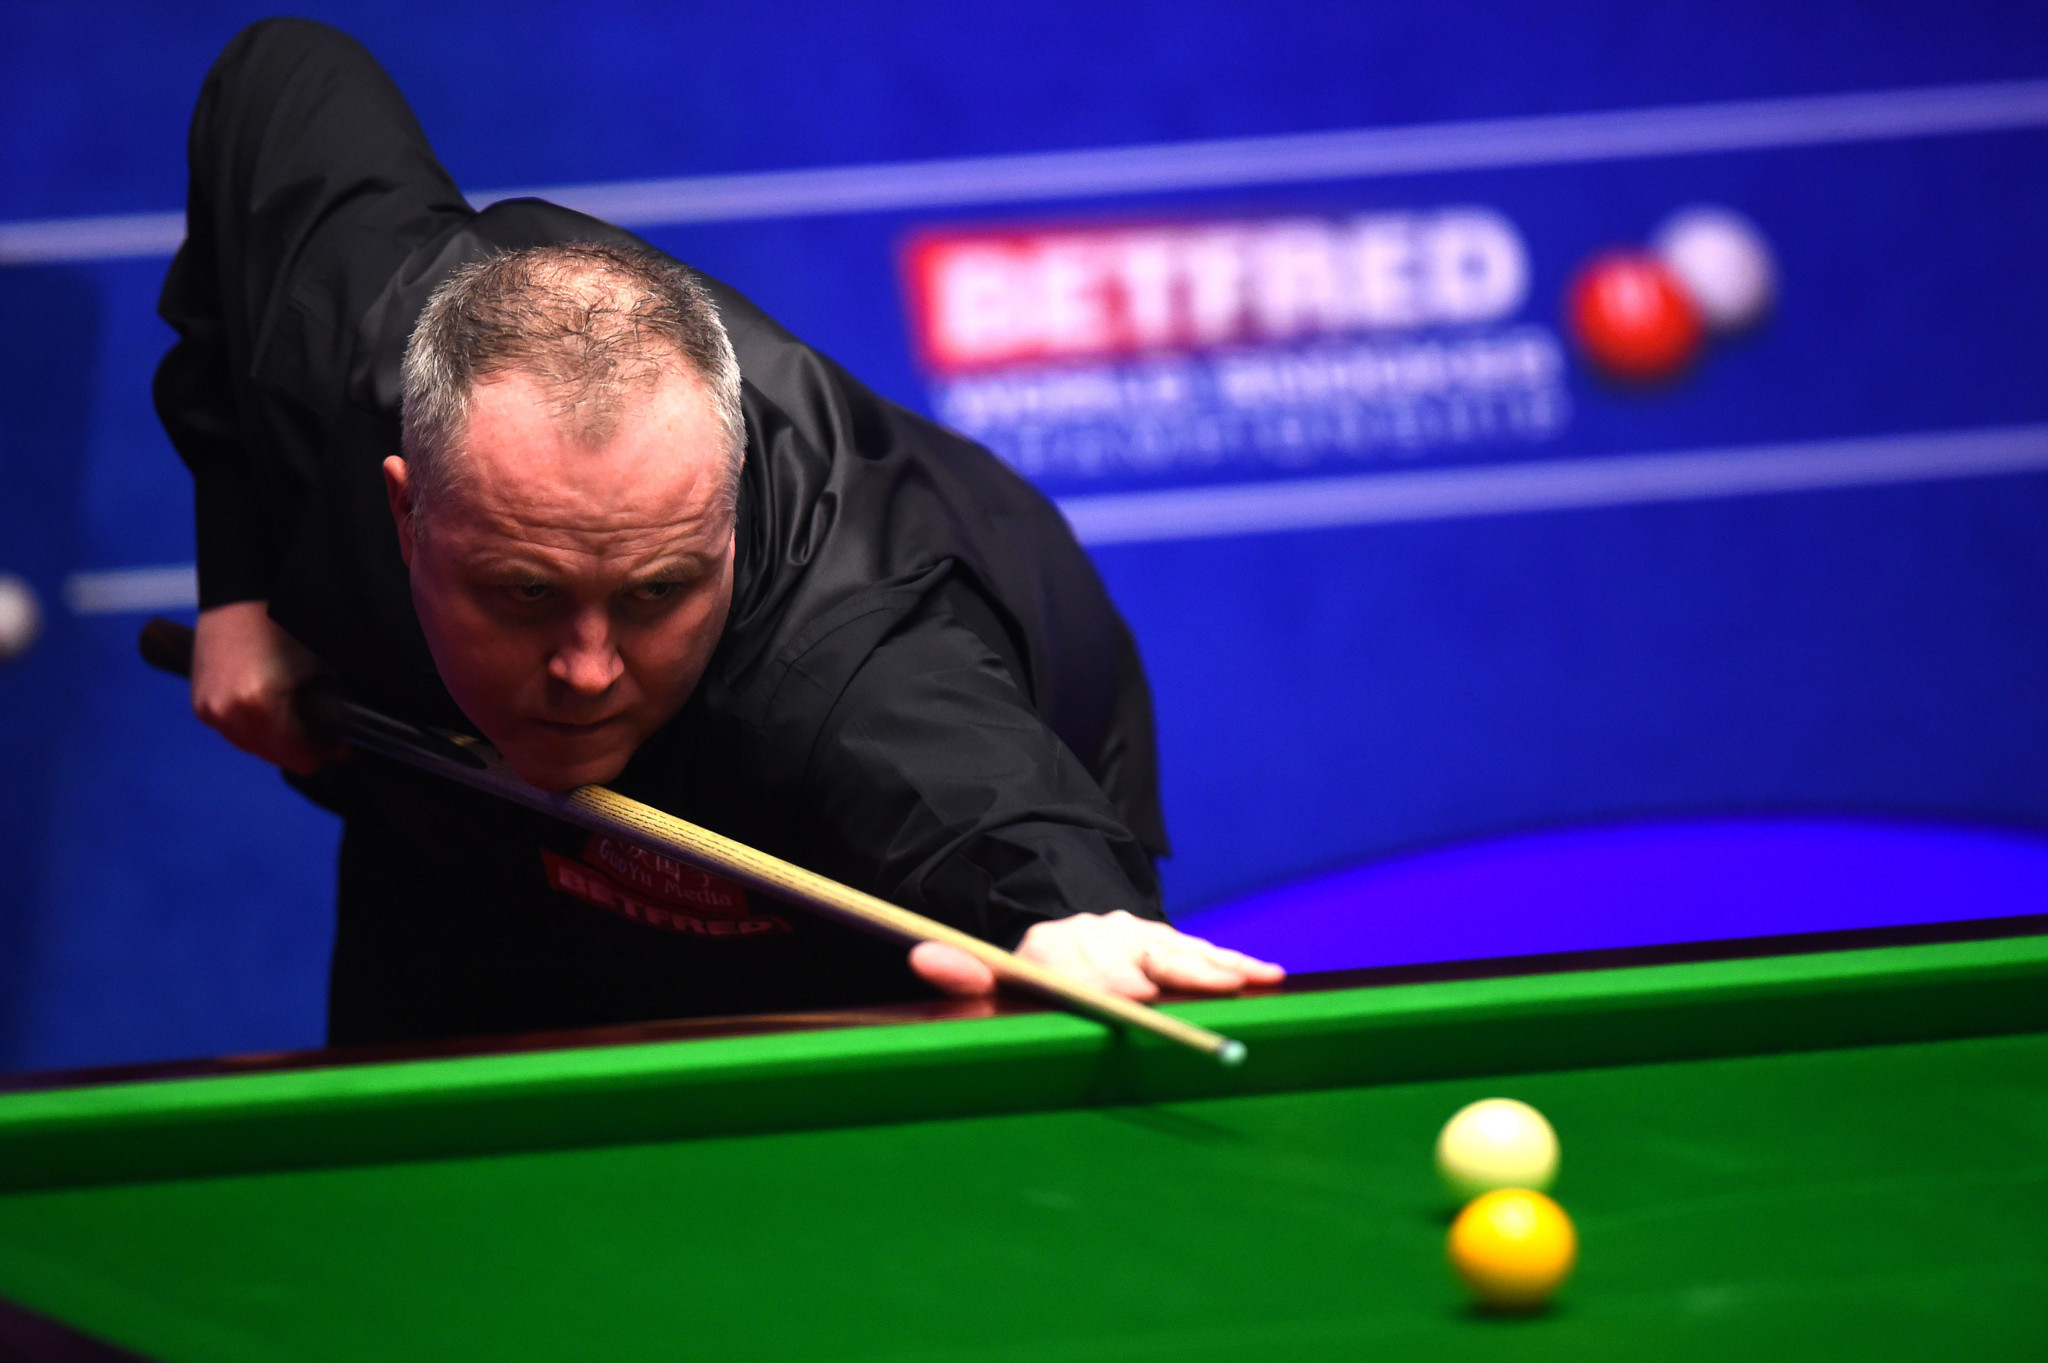 Scotland's John Higgins, a three-time winner of the event, reached round two of the World Snooker Championship today ©Getty Images